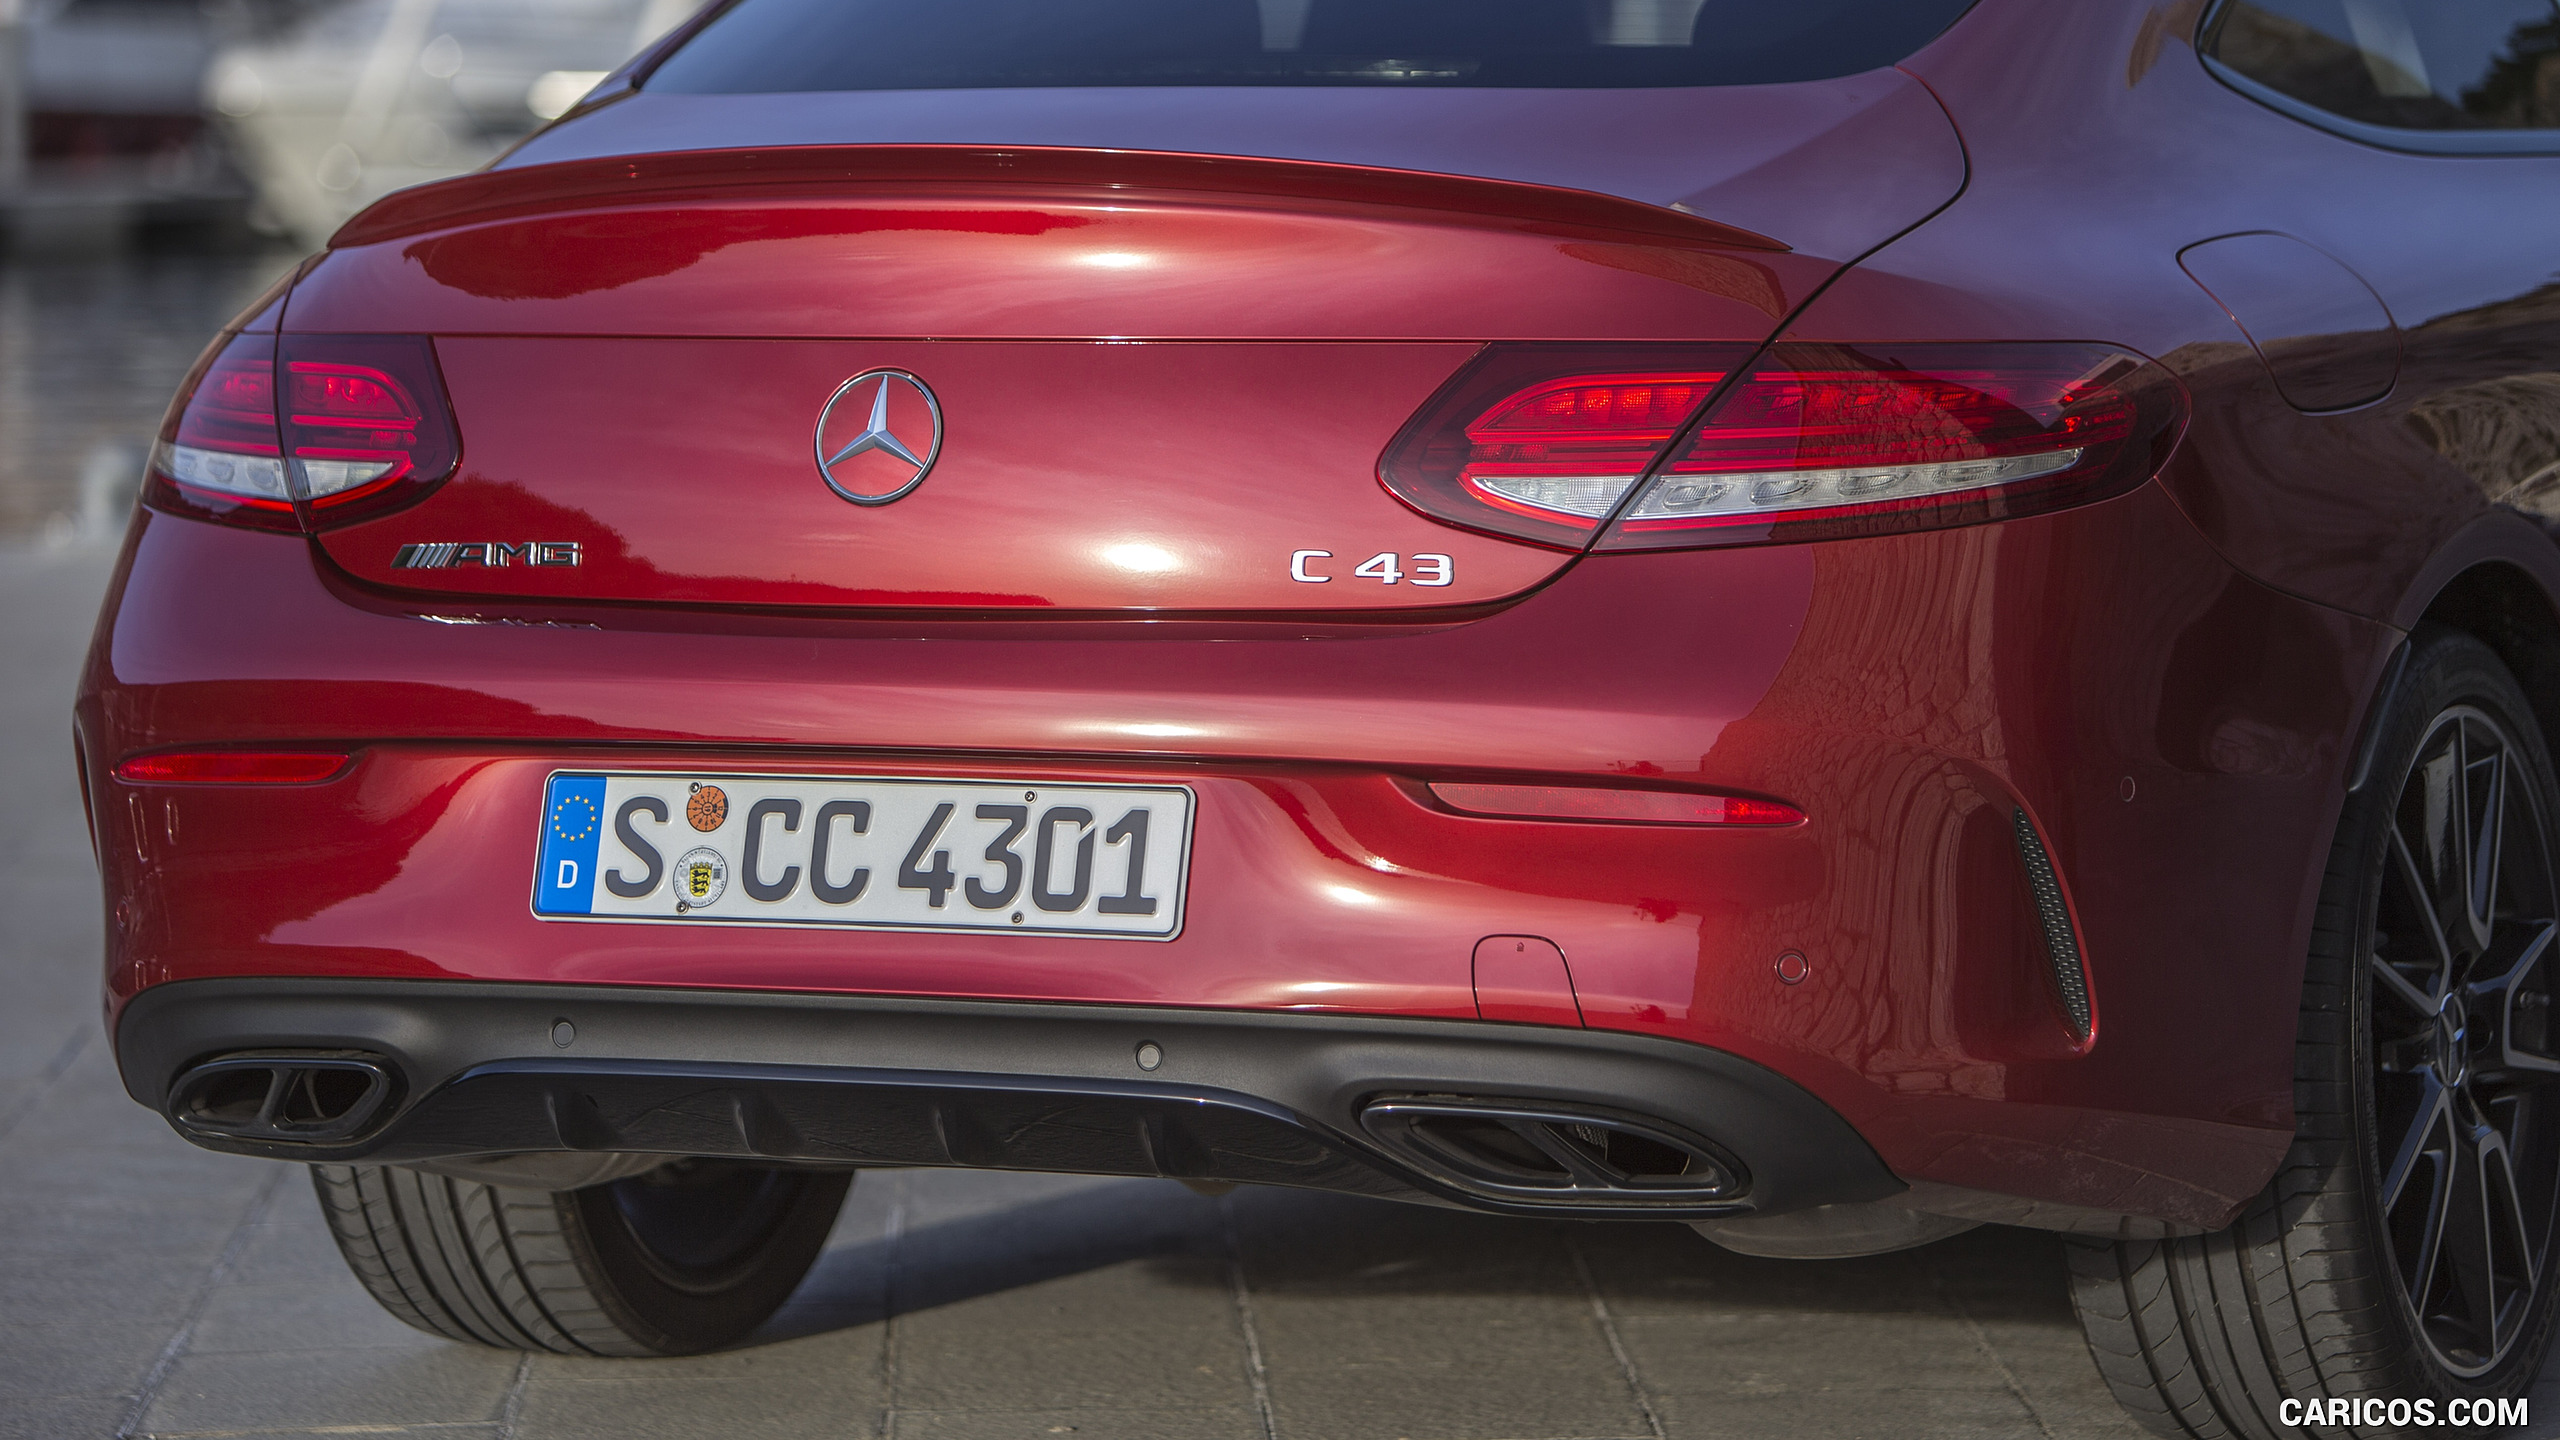 2017 Mercedes-AMG C43 4MATIC Coupé - Rear, #25 of 30